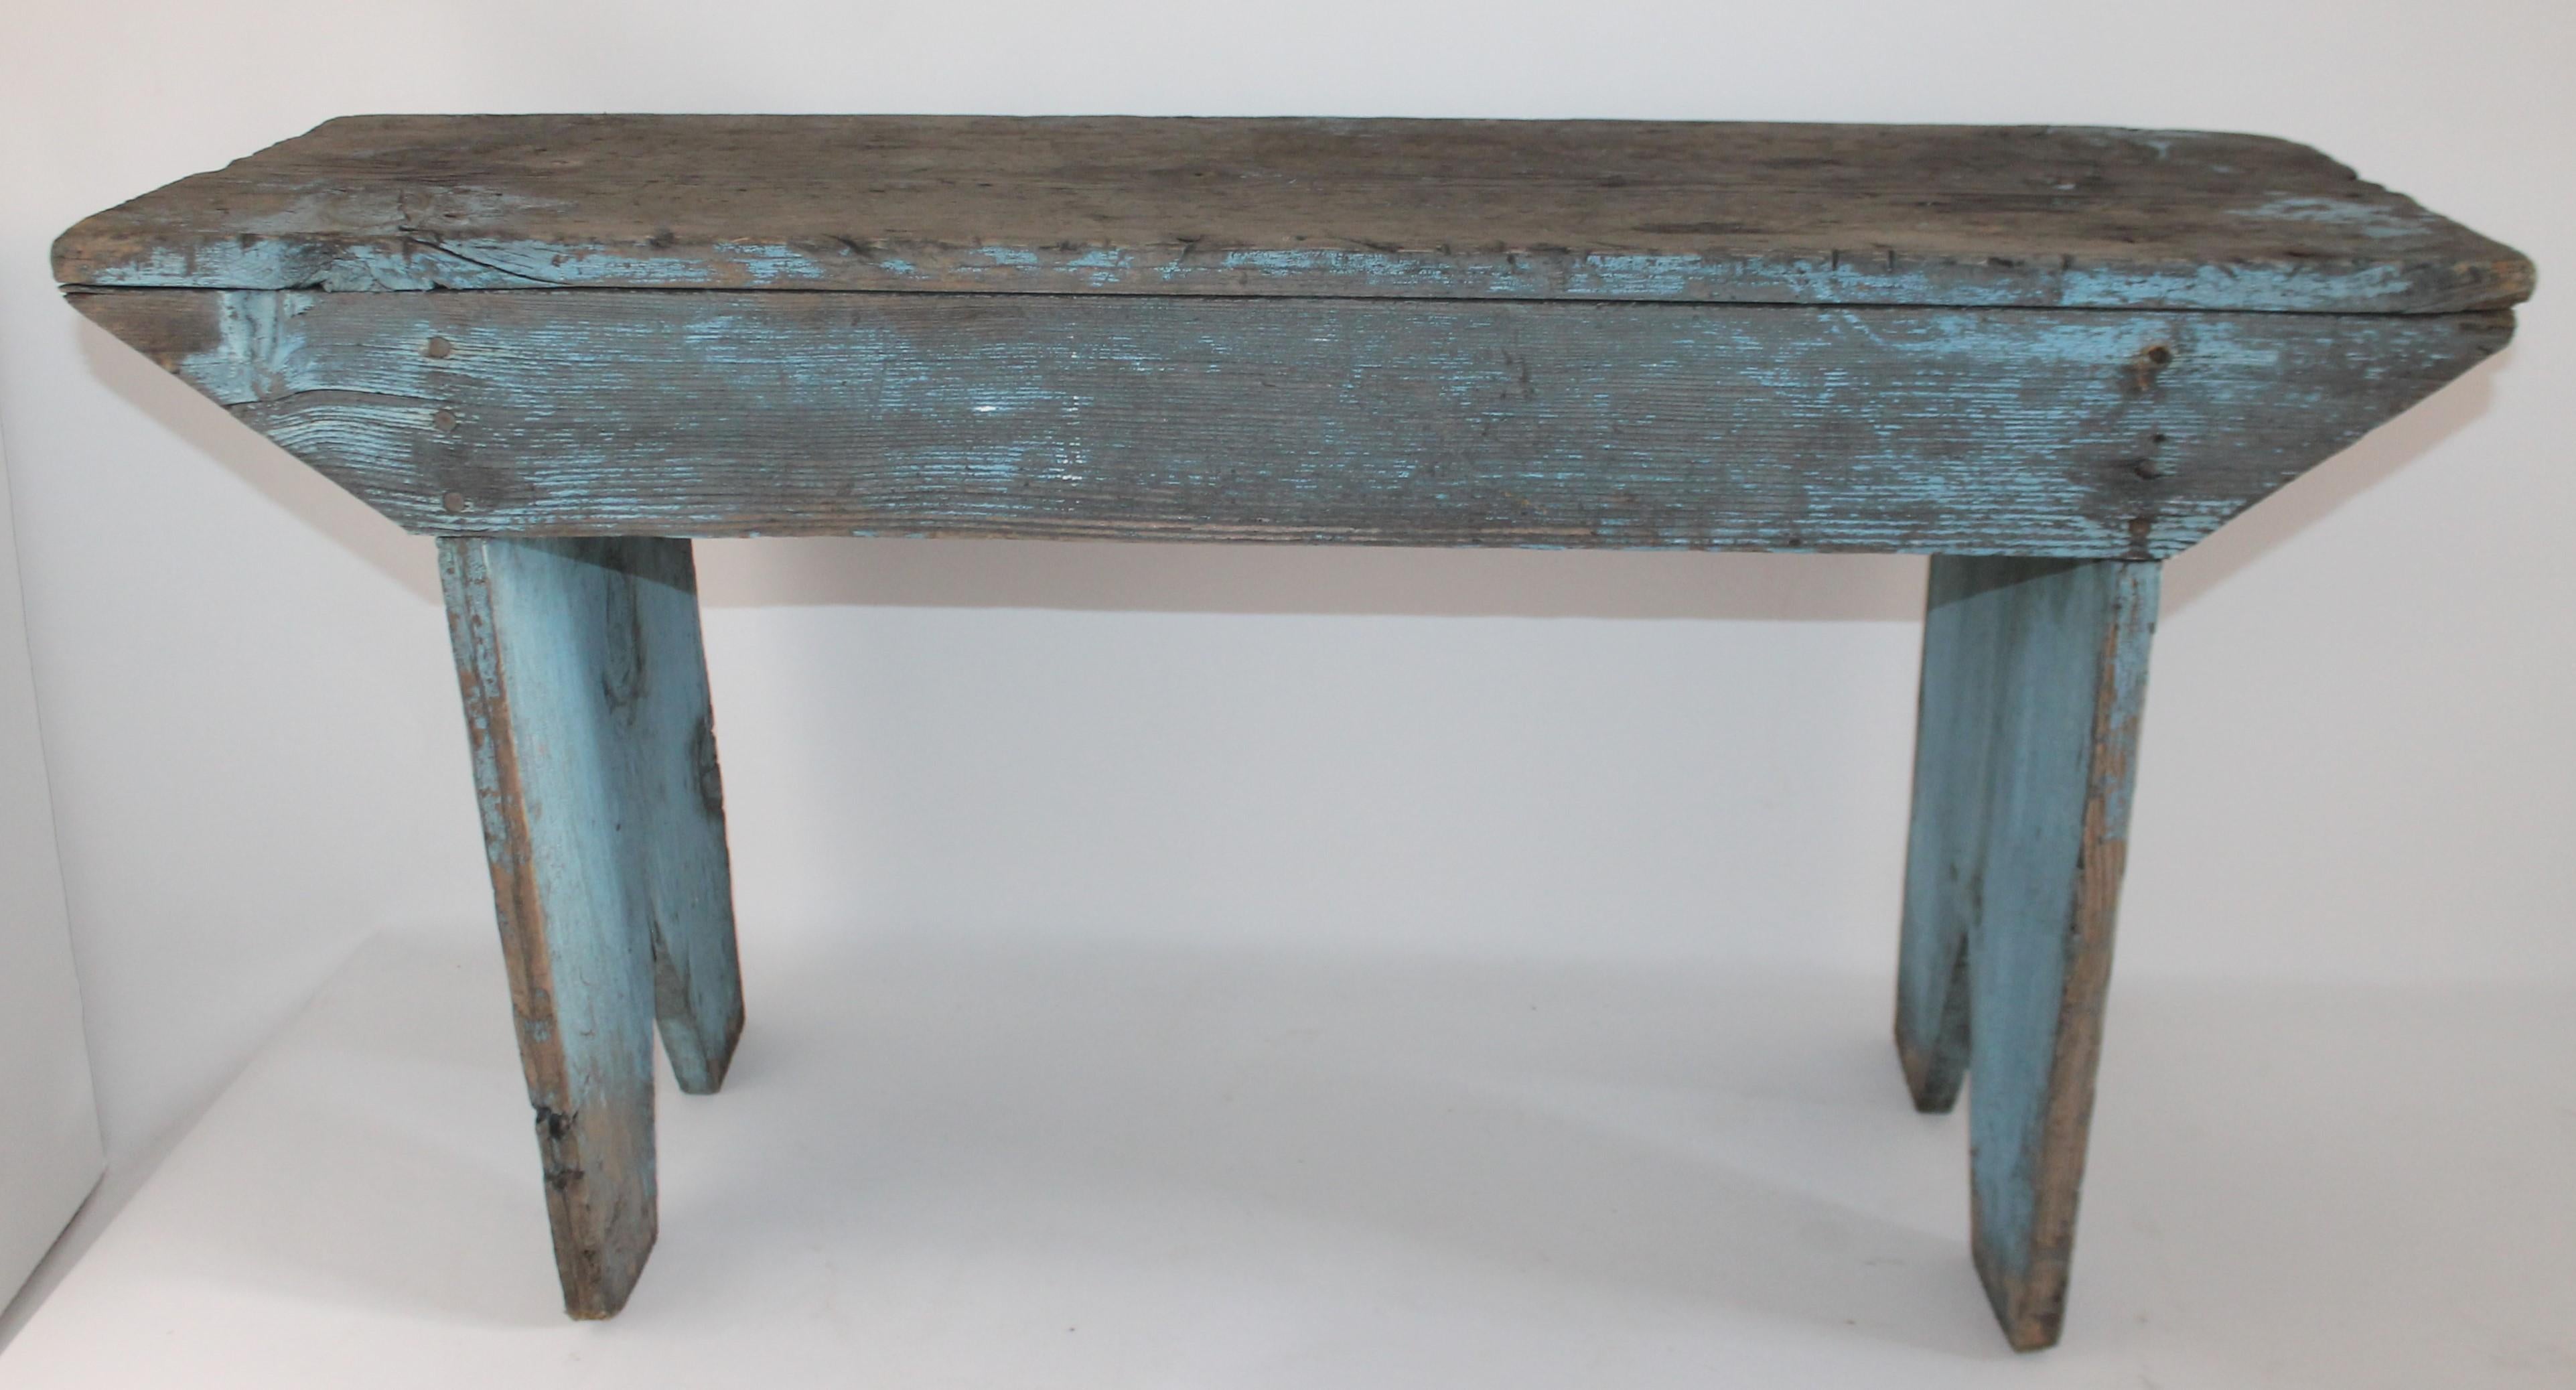 19th century original painted Robin egg blue bench from a farm in Pennsylvania. This country bench is in good sturdy condition and has been professionally checked for strength and stability. Has a wonderful aged patina.